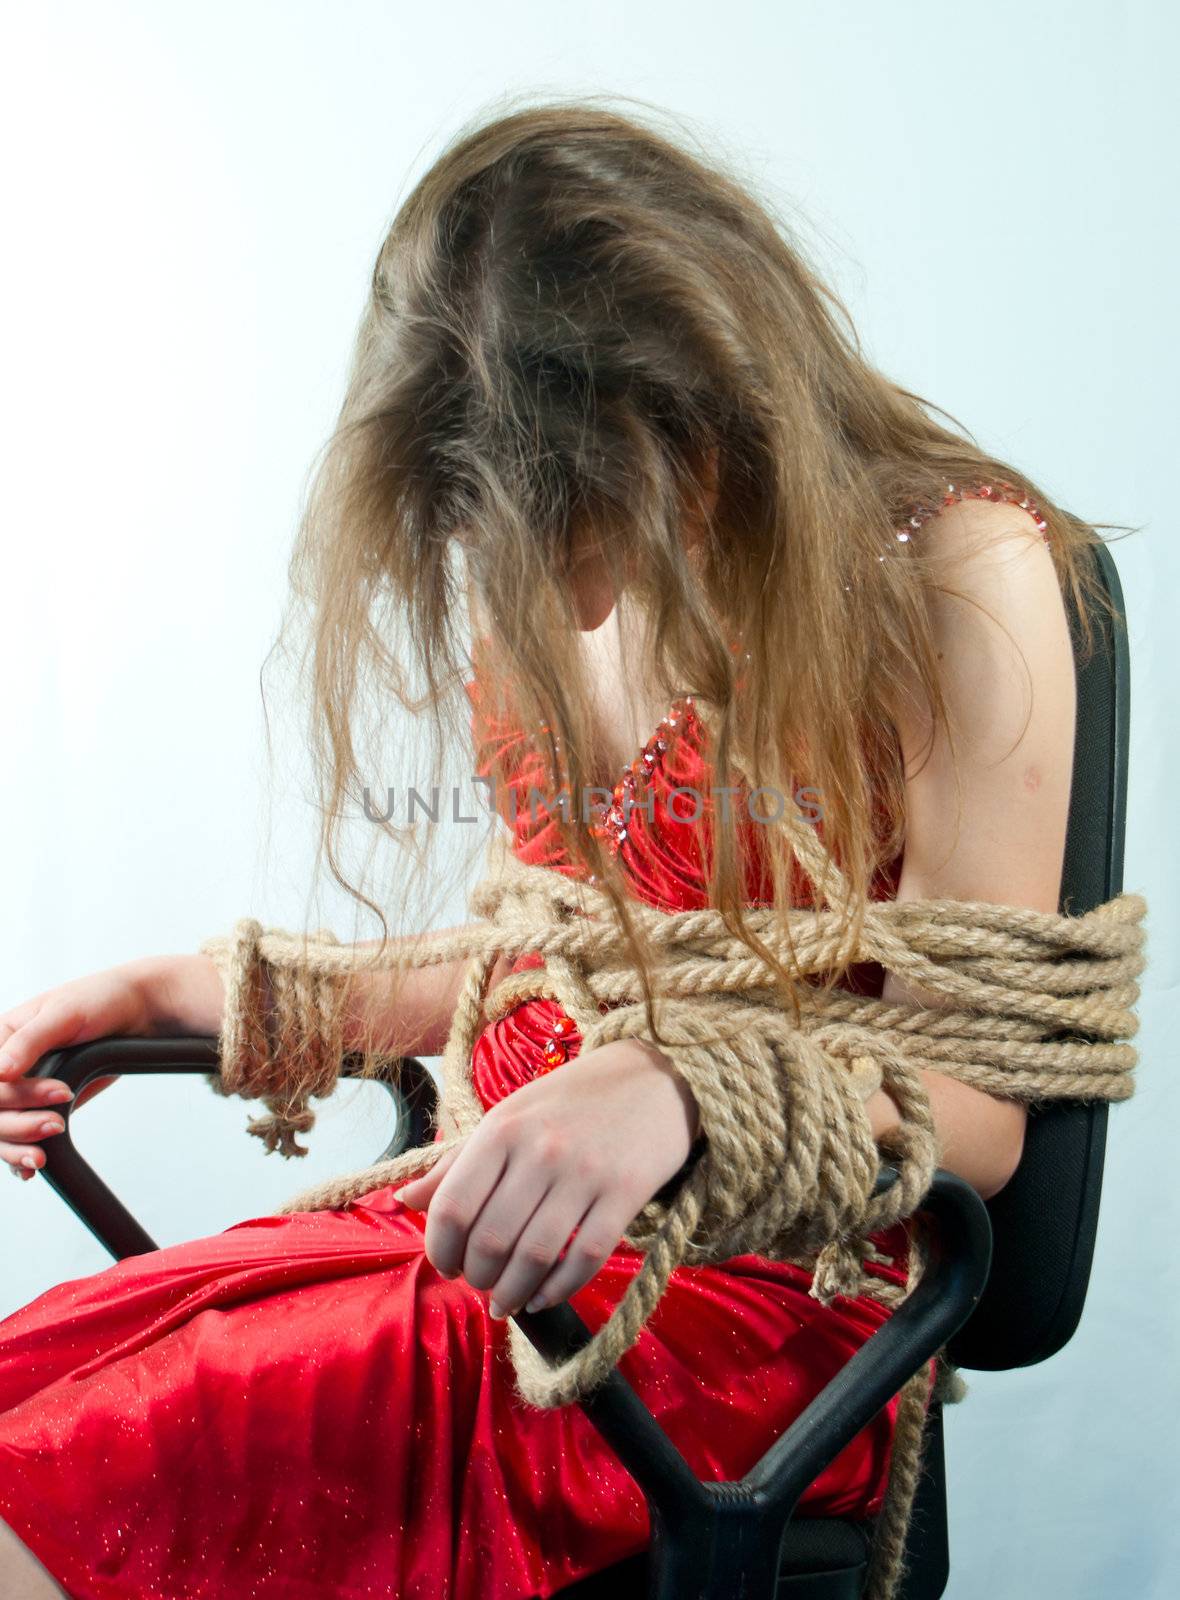 Woman tied up with a rope against light background